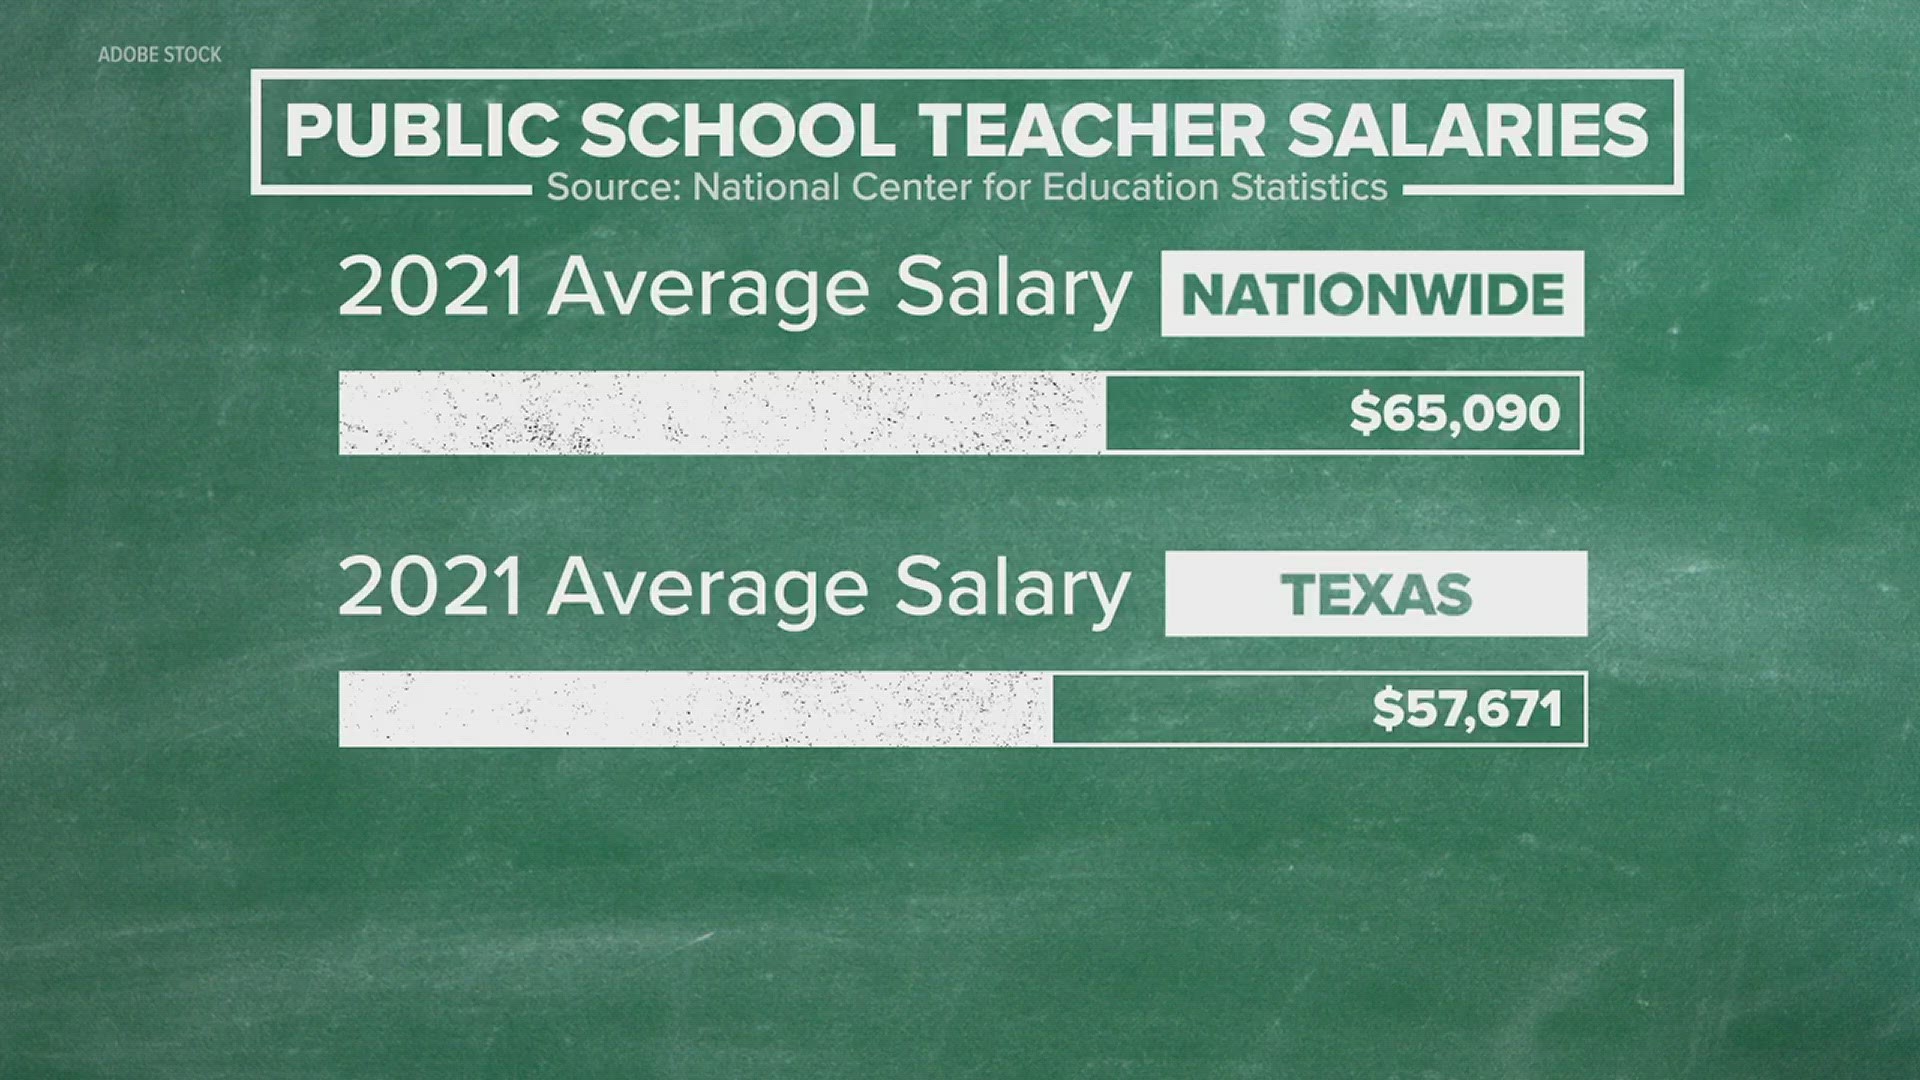 Rep. Trey Martinez Fischer pushed for the $3,800 per teacher pay raise to bump up to $10,000. The effort went down on a 79-66 party-line vote.